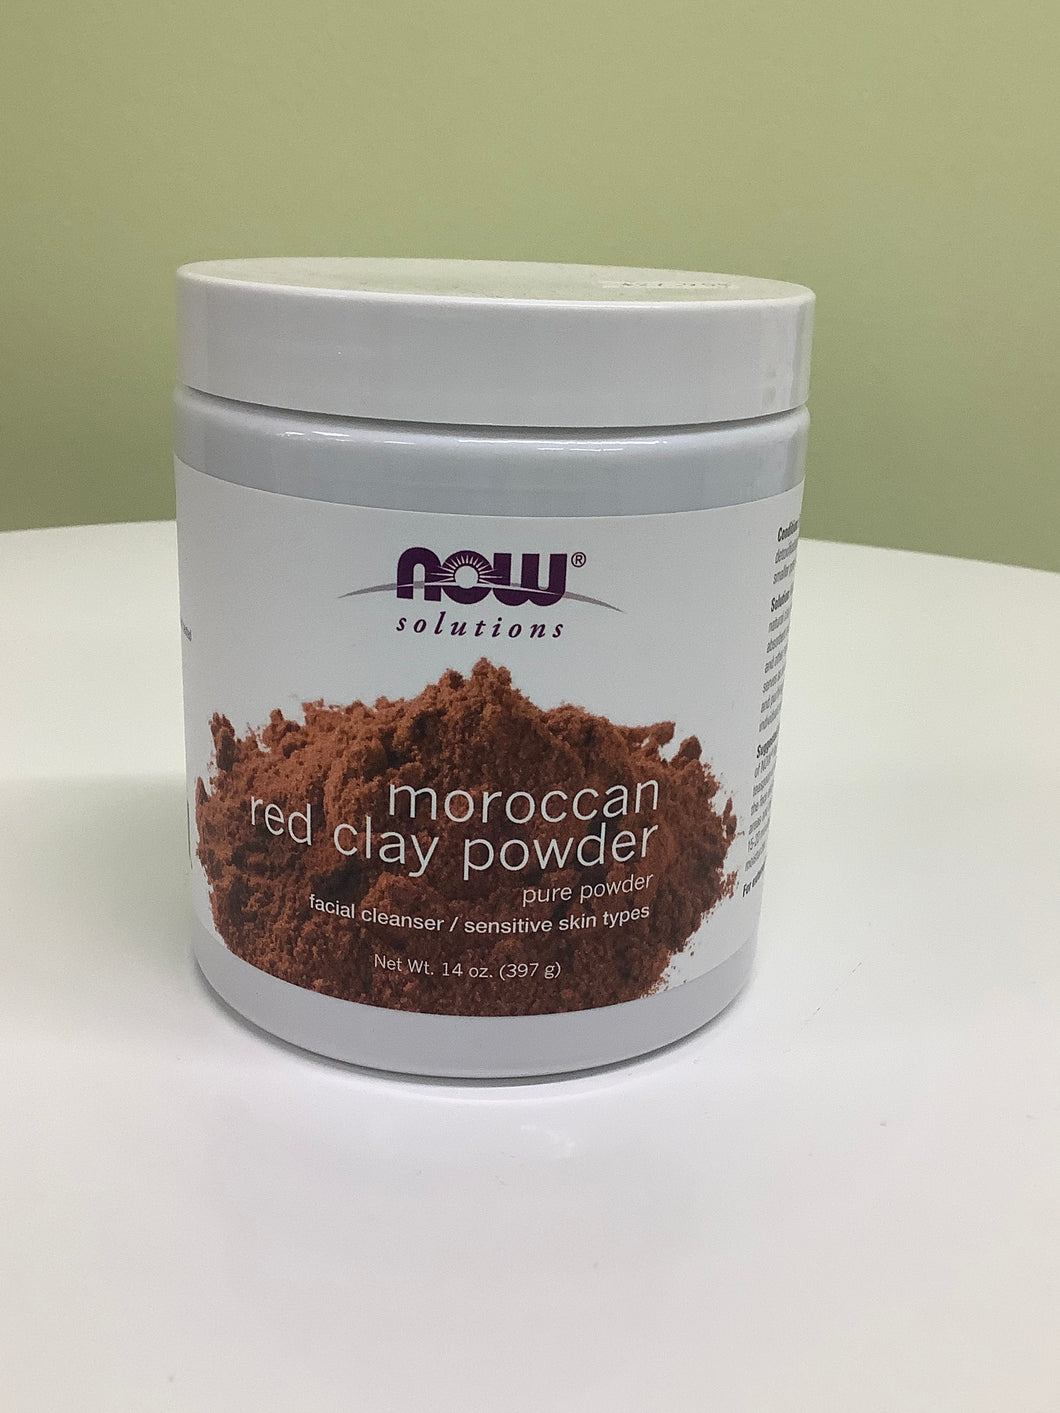 Now Moroccan red clay powder